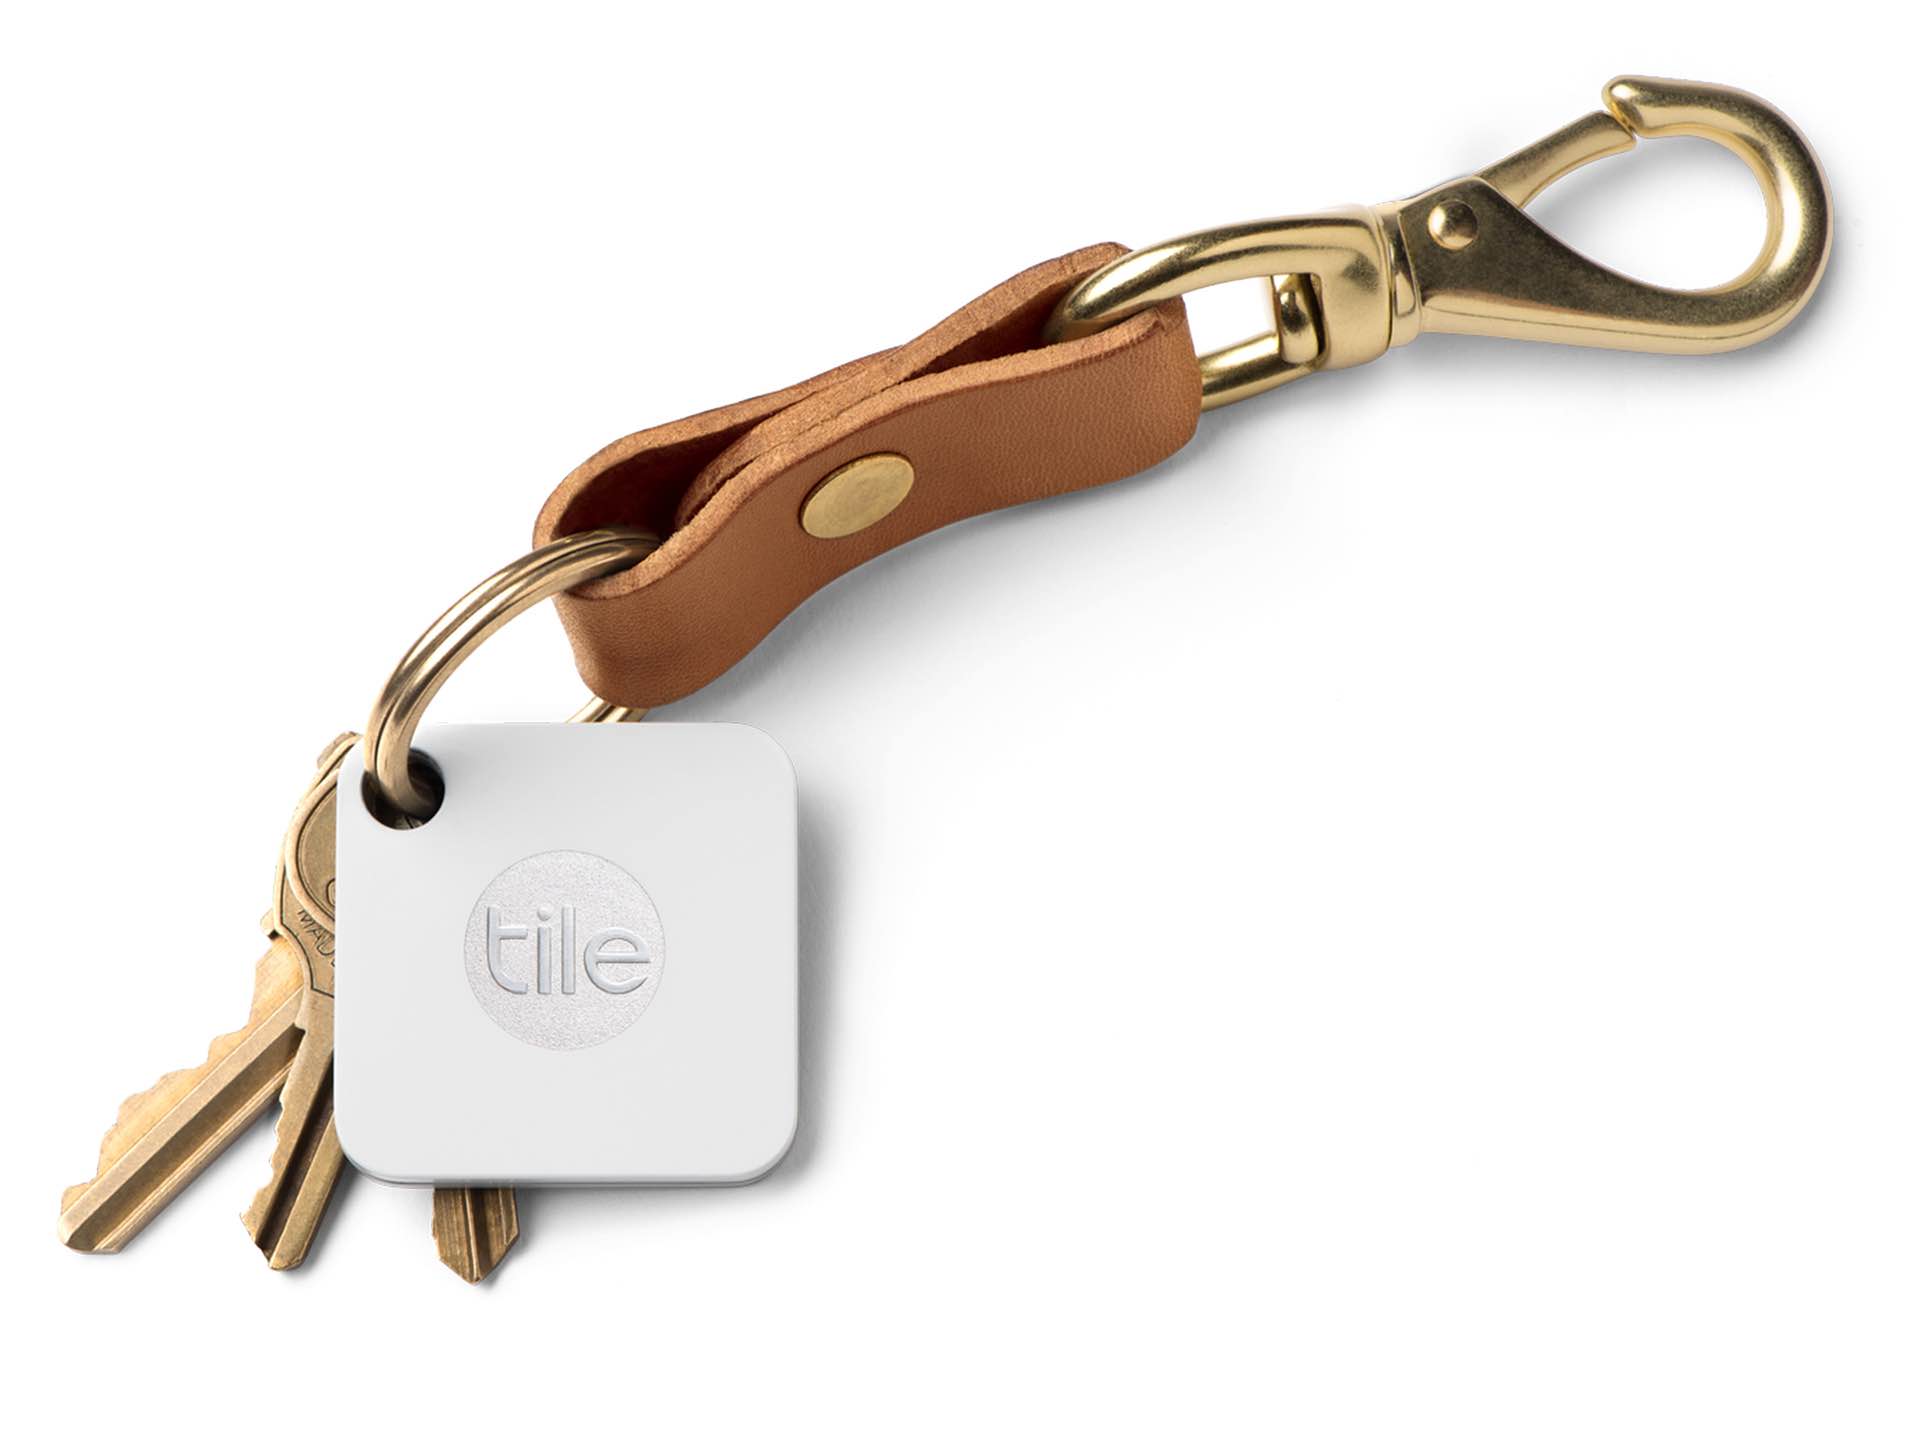 Tile Mate Bluetooth tracker & key finder. ($20 for one, $58 for a 4-pack, or $109 for an 8-pack)